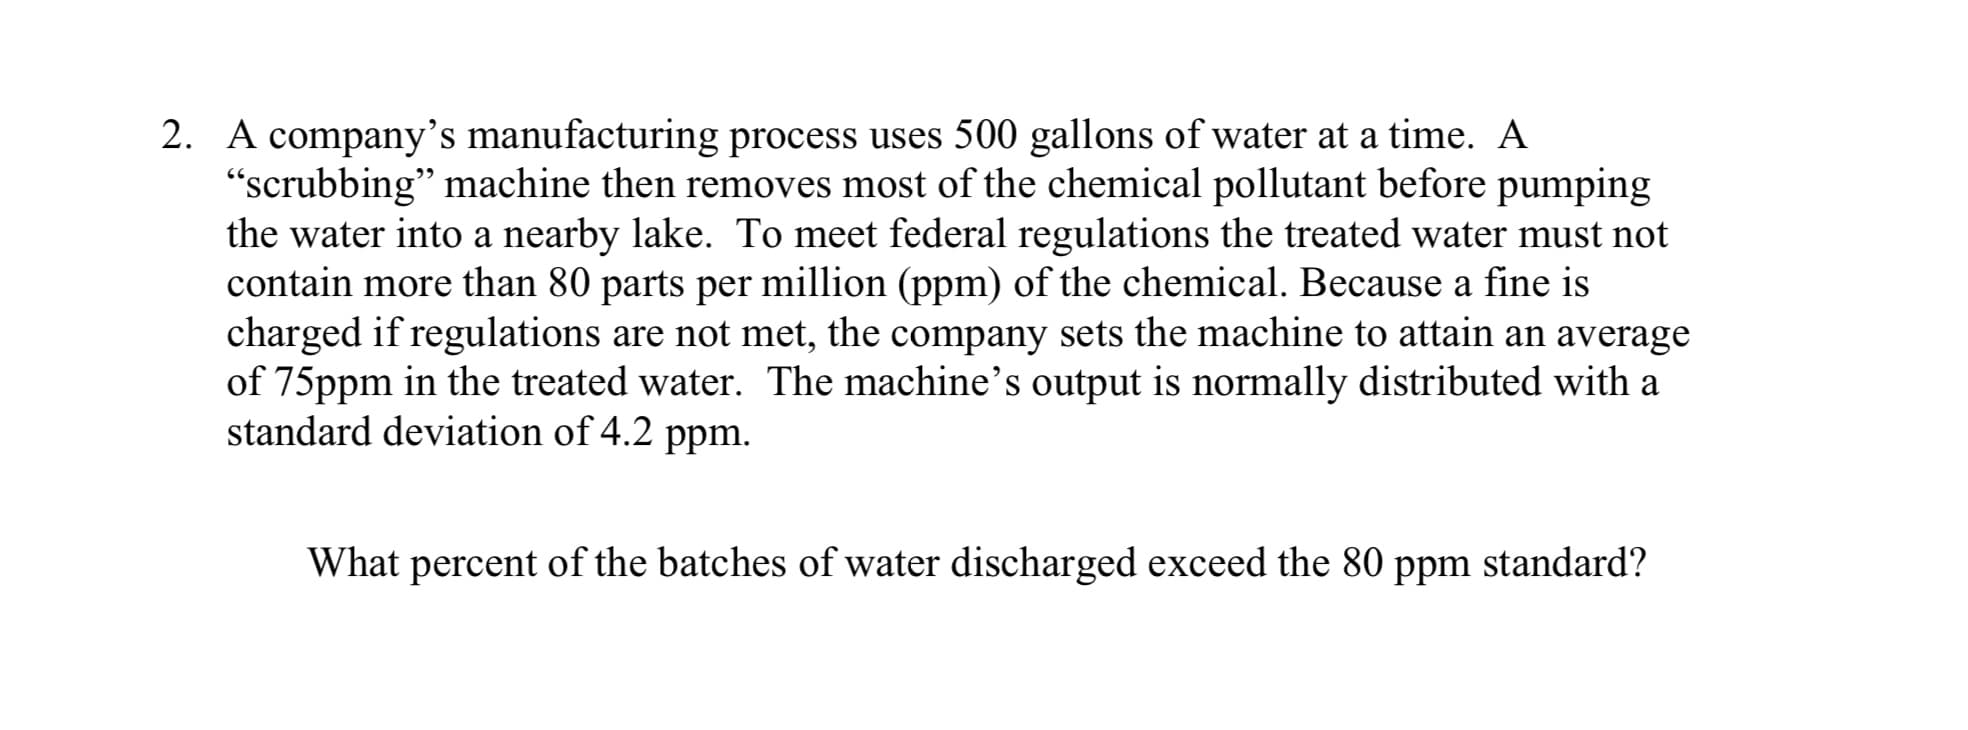 What percent of the batches of water discharged exceed the 80 ppm standard?
